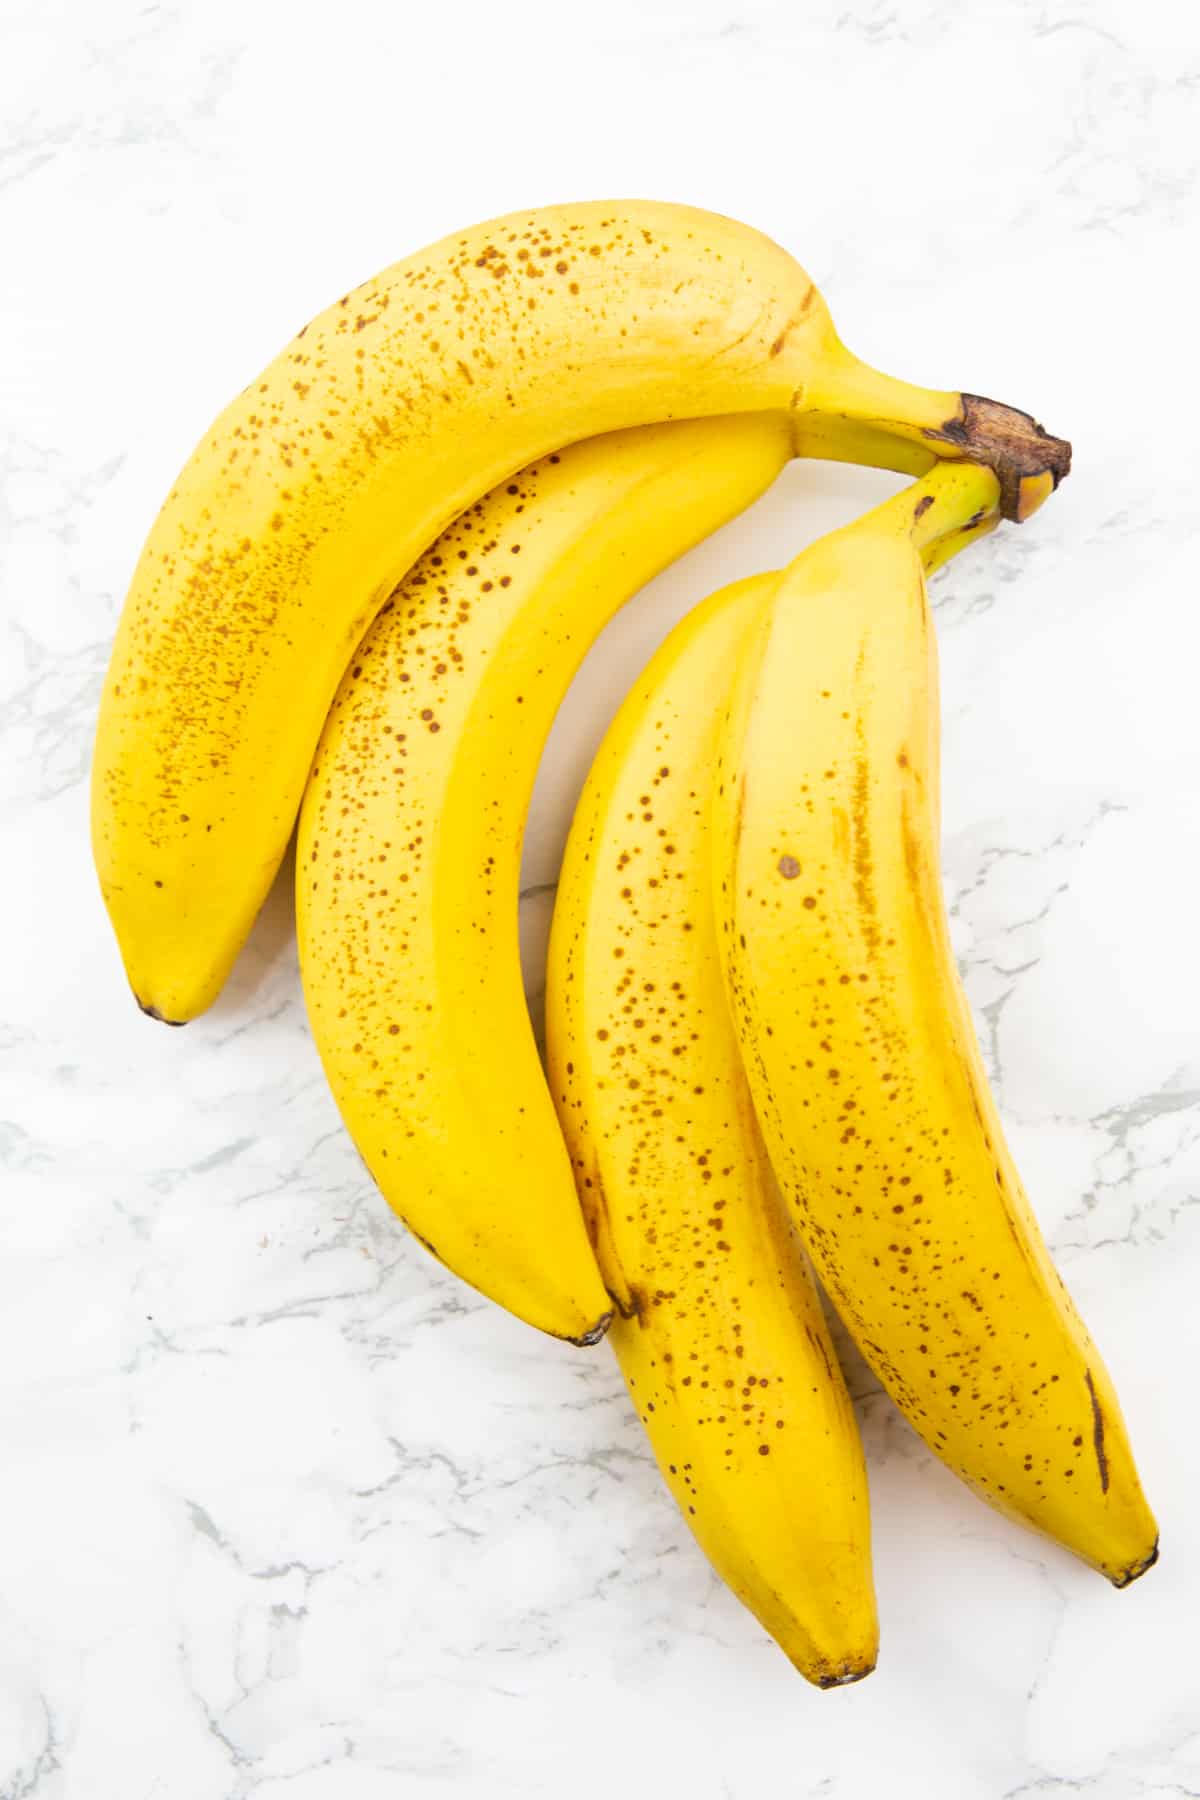 four ripe bananas on a marble countertop 